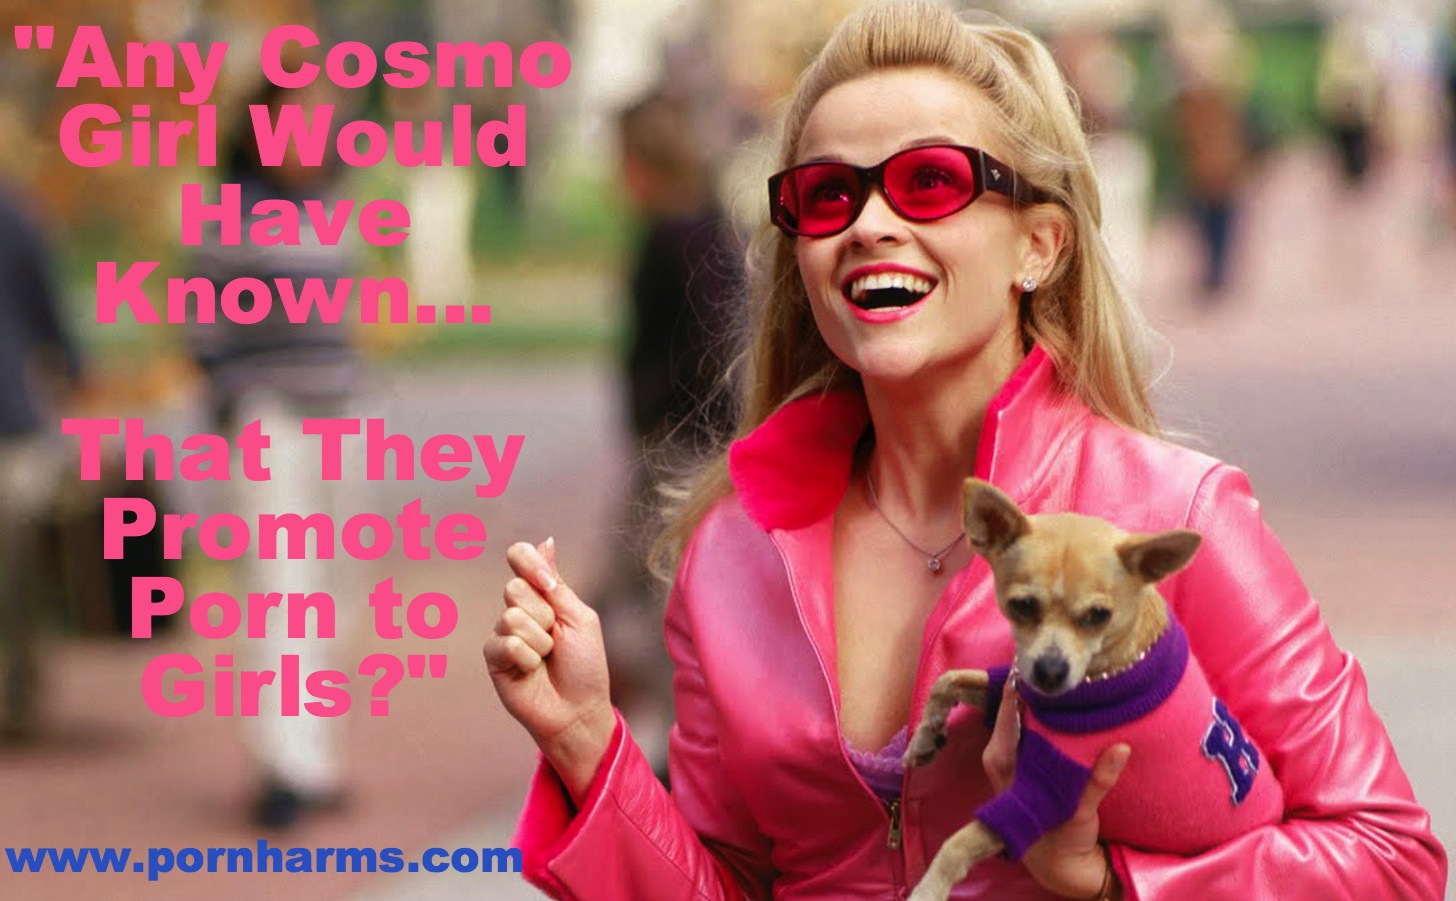 Any Cosmo Girl Would Have Known…That They Promote Porn to Girls?